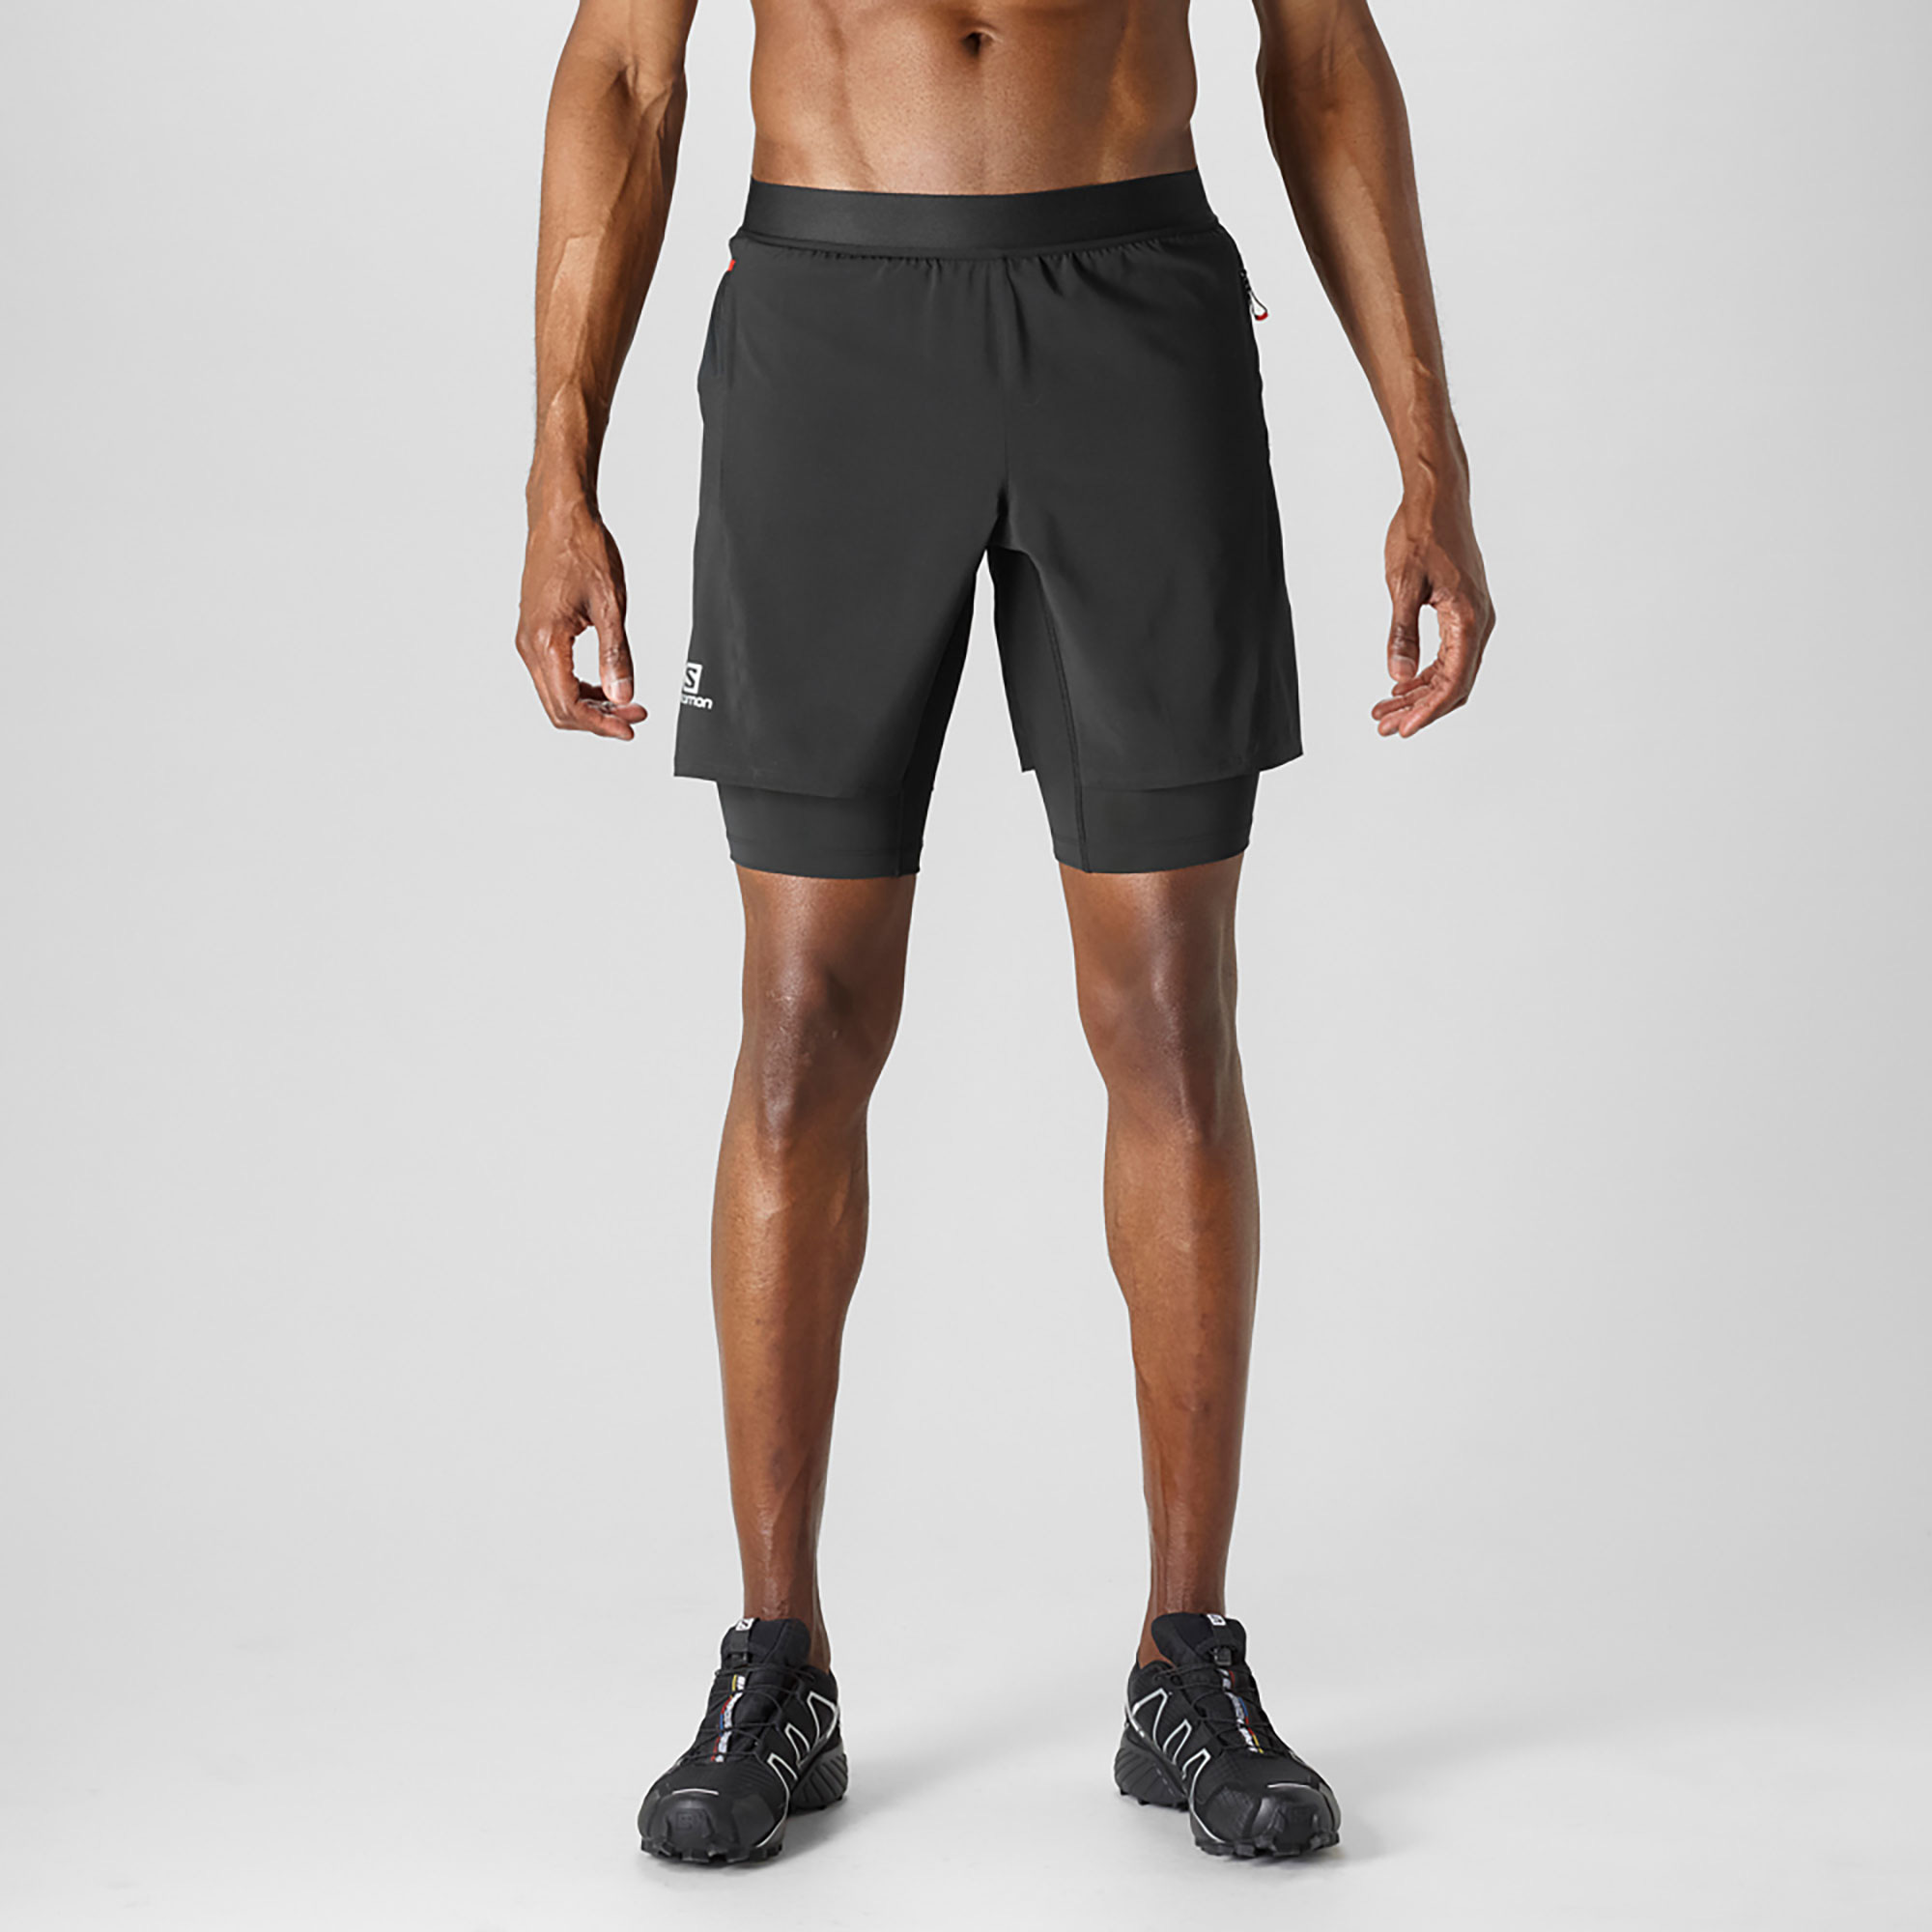 20 Running Shorts With Pockets For Maximum Functionality | Running Shorts